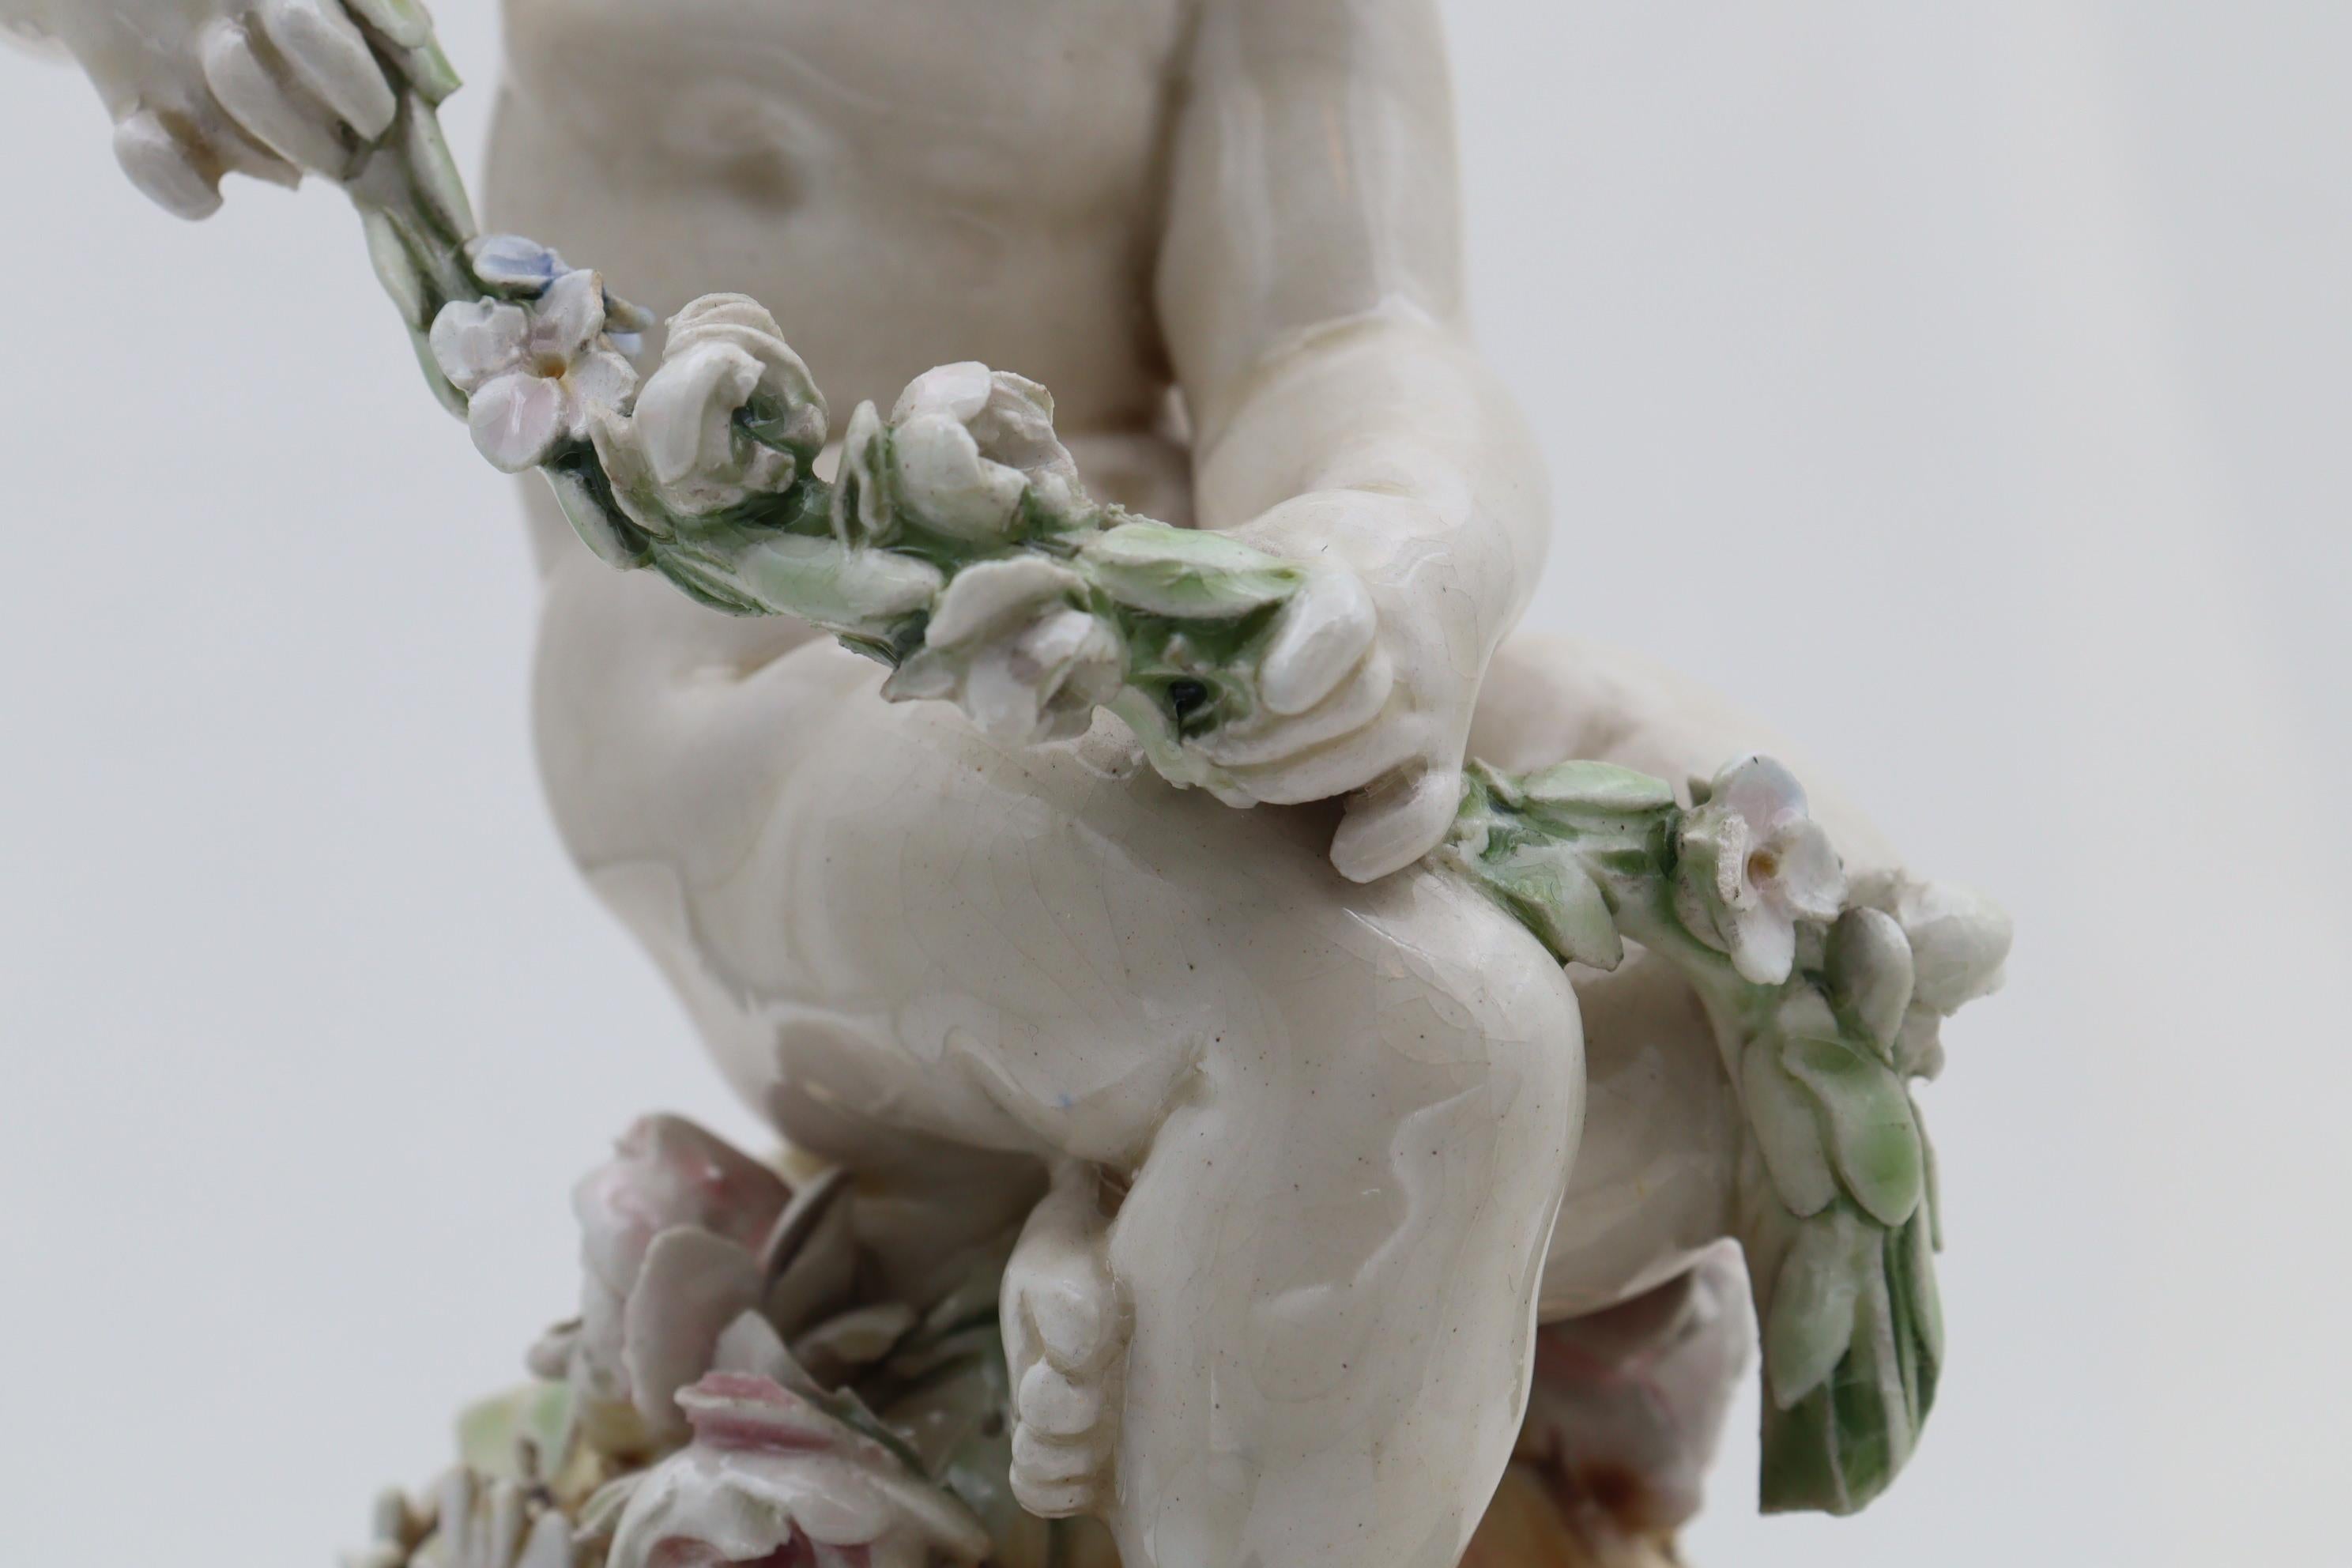 Cherub figurine by Louis Carrier-Belleuse For Sale 1